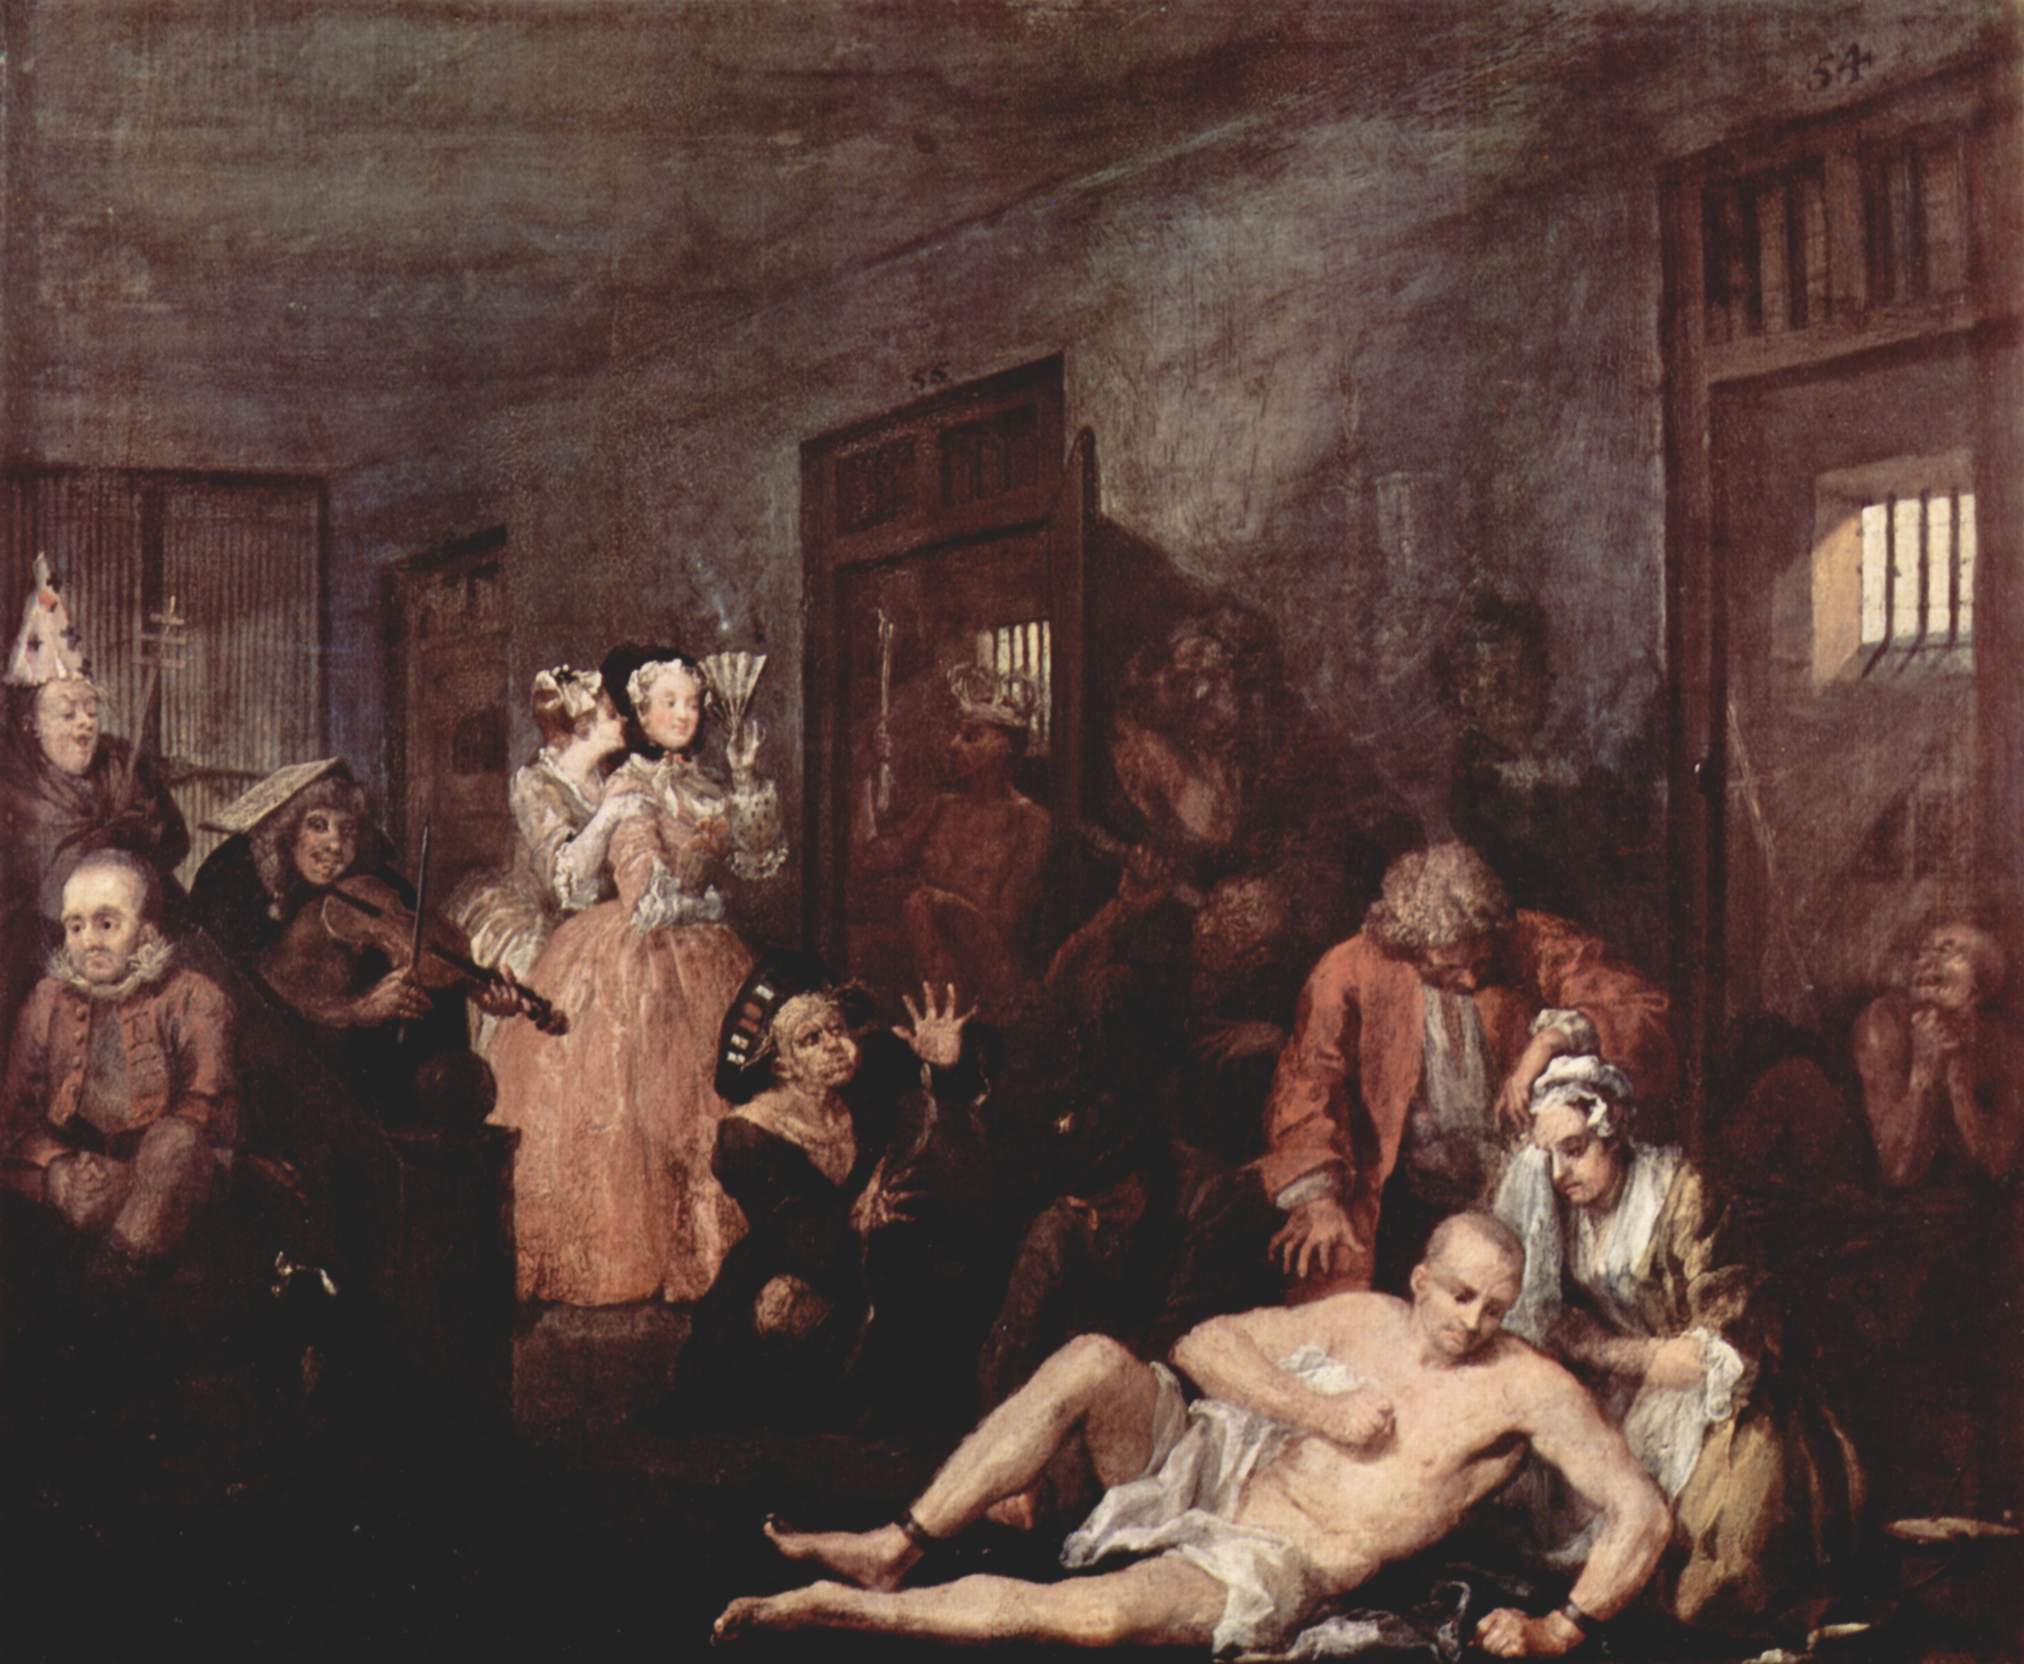 Eighteenth century Bethlem was most notably portrayed in a scene from William Hogarth's A Rake's Progress (1735), the story of a rich merchant's son, Tom Rakewell whose immoral living causes him to end up in Bethlem. 